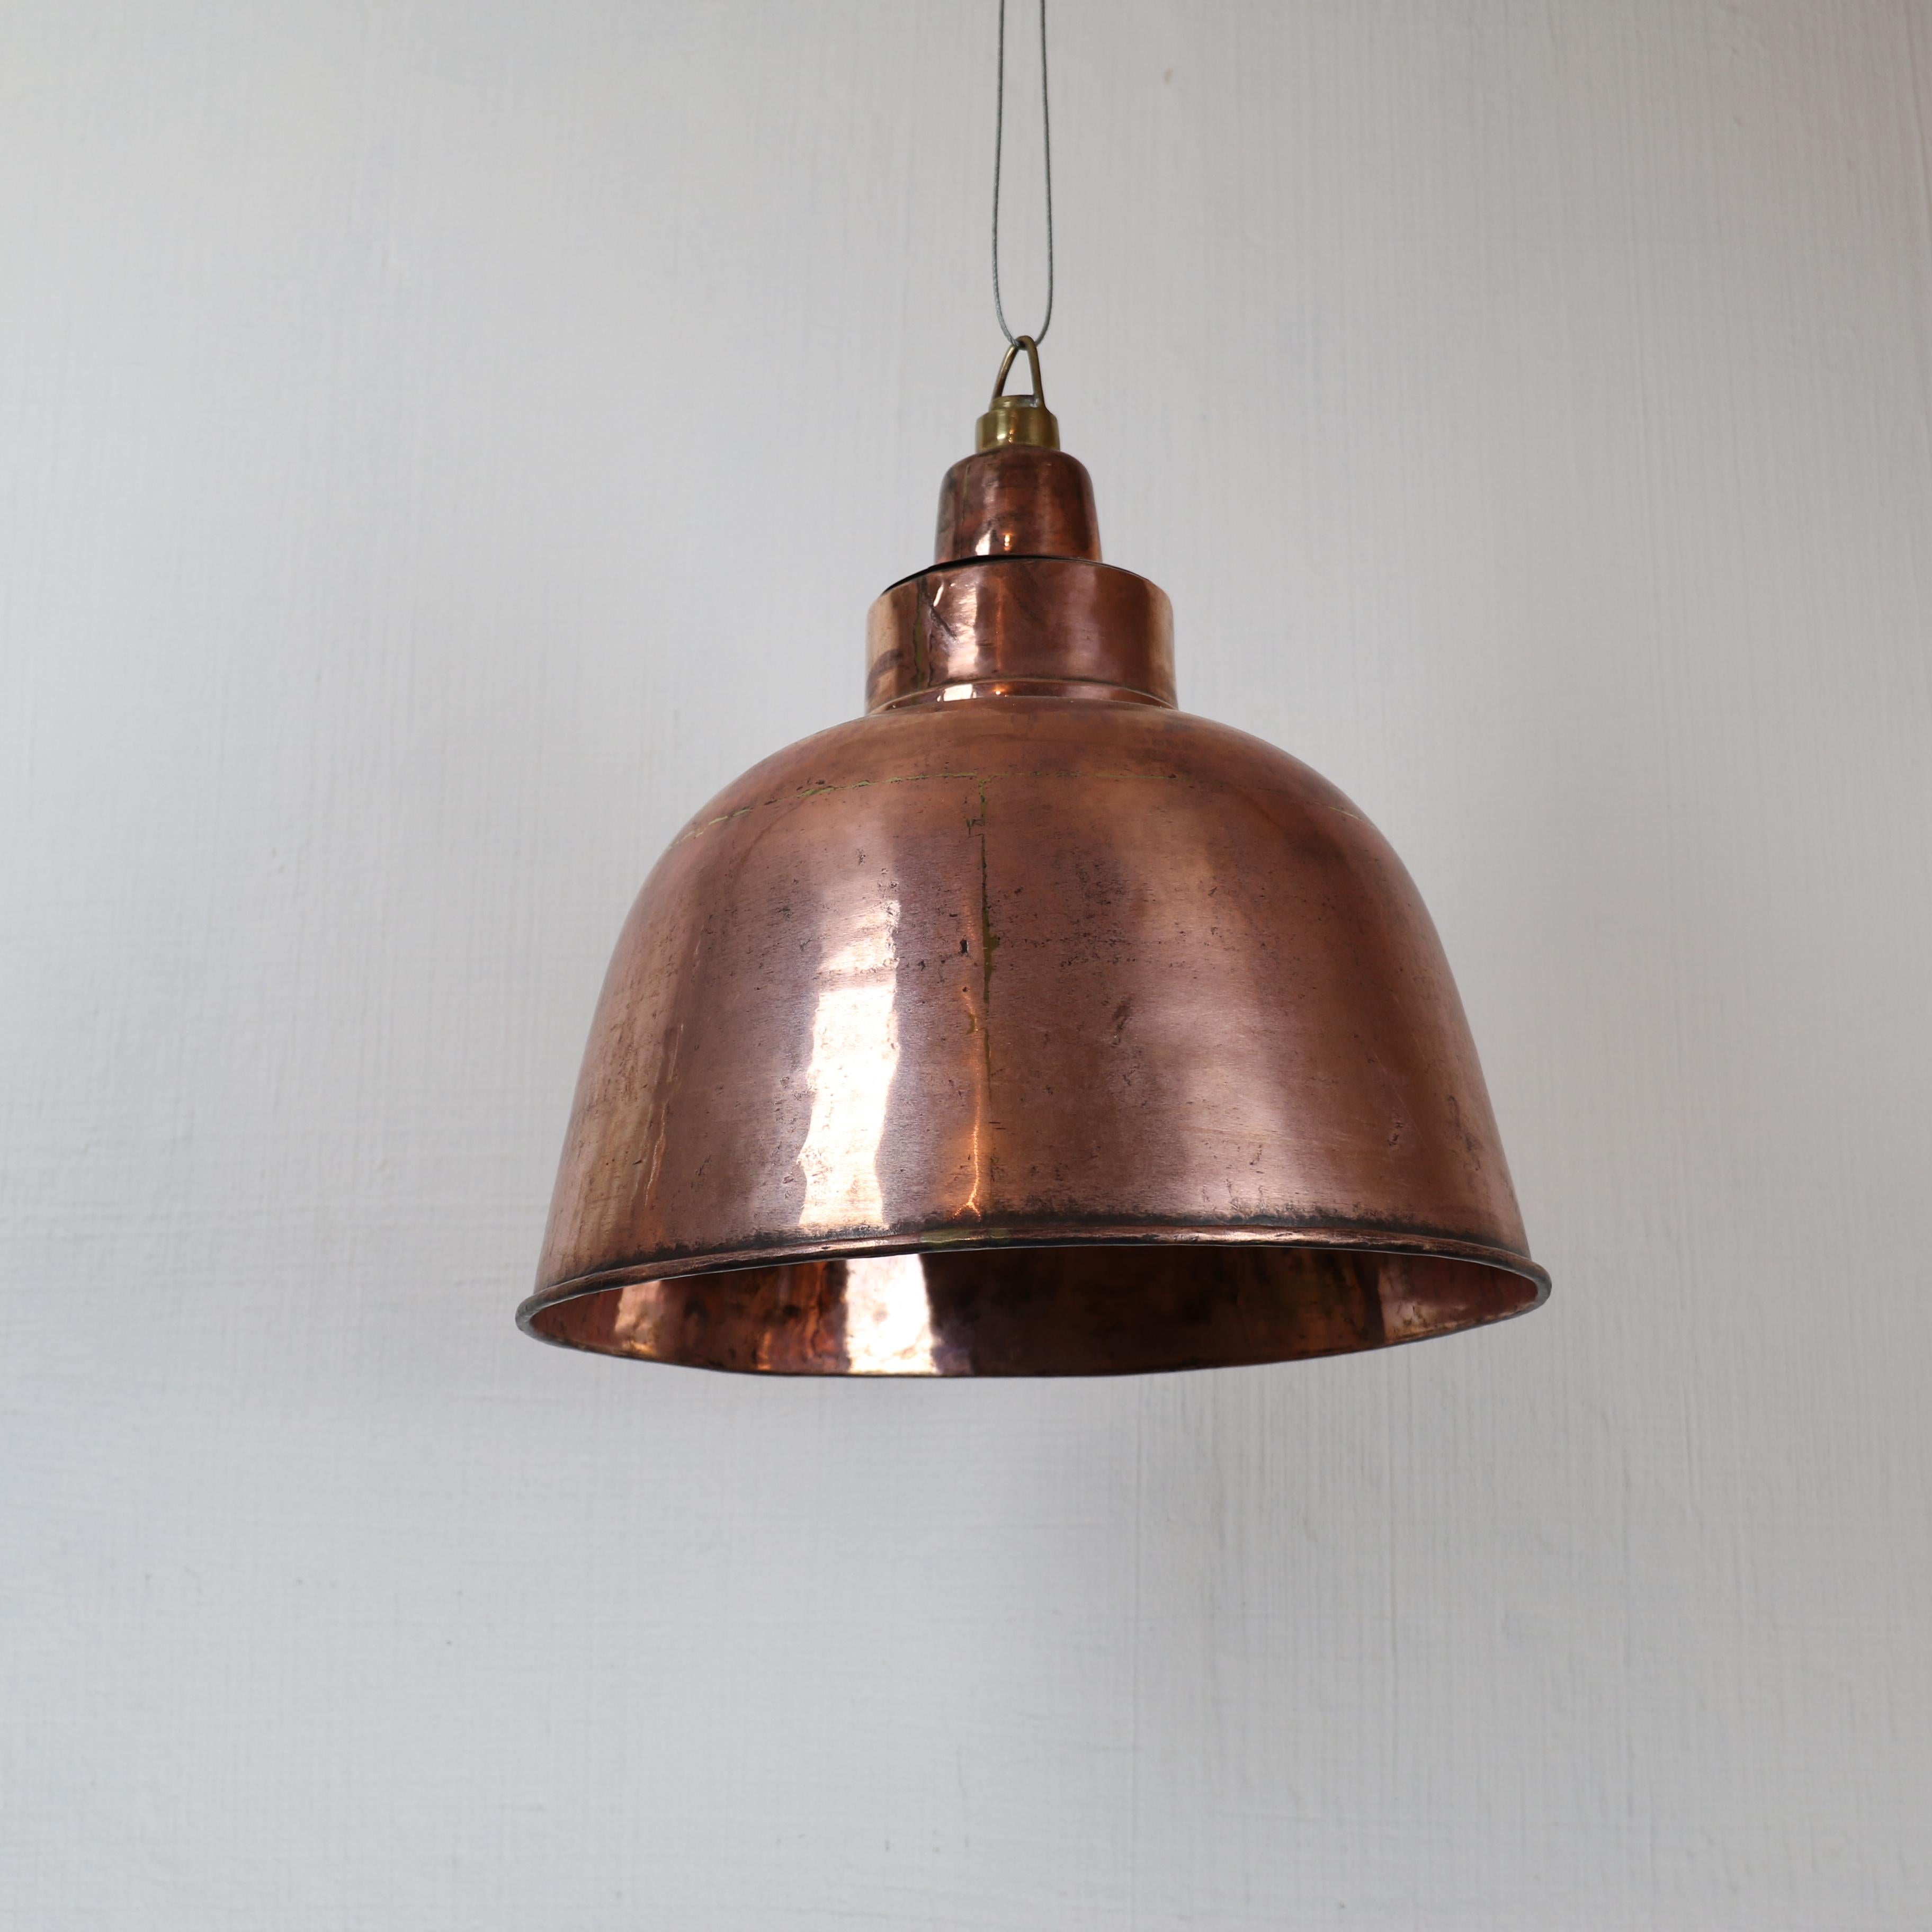 Two in stock

Beautiful old coppered brass ceiling light reclaimed from a ship machine room. The inside of the shade is hammered creating a nice dazzling light. The industrial light shows nice details like the joints of the brasure technique which